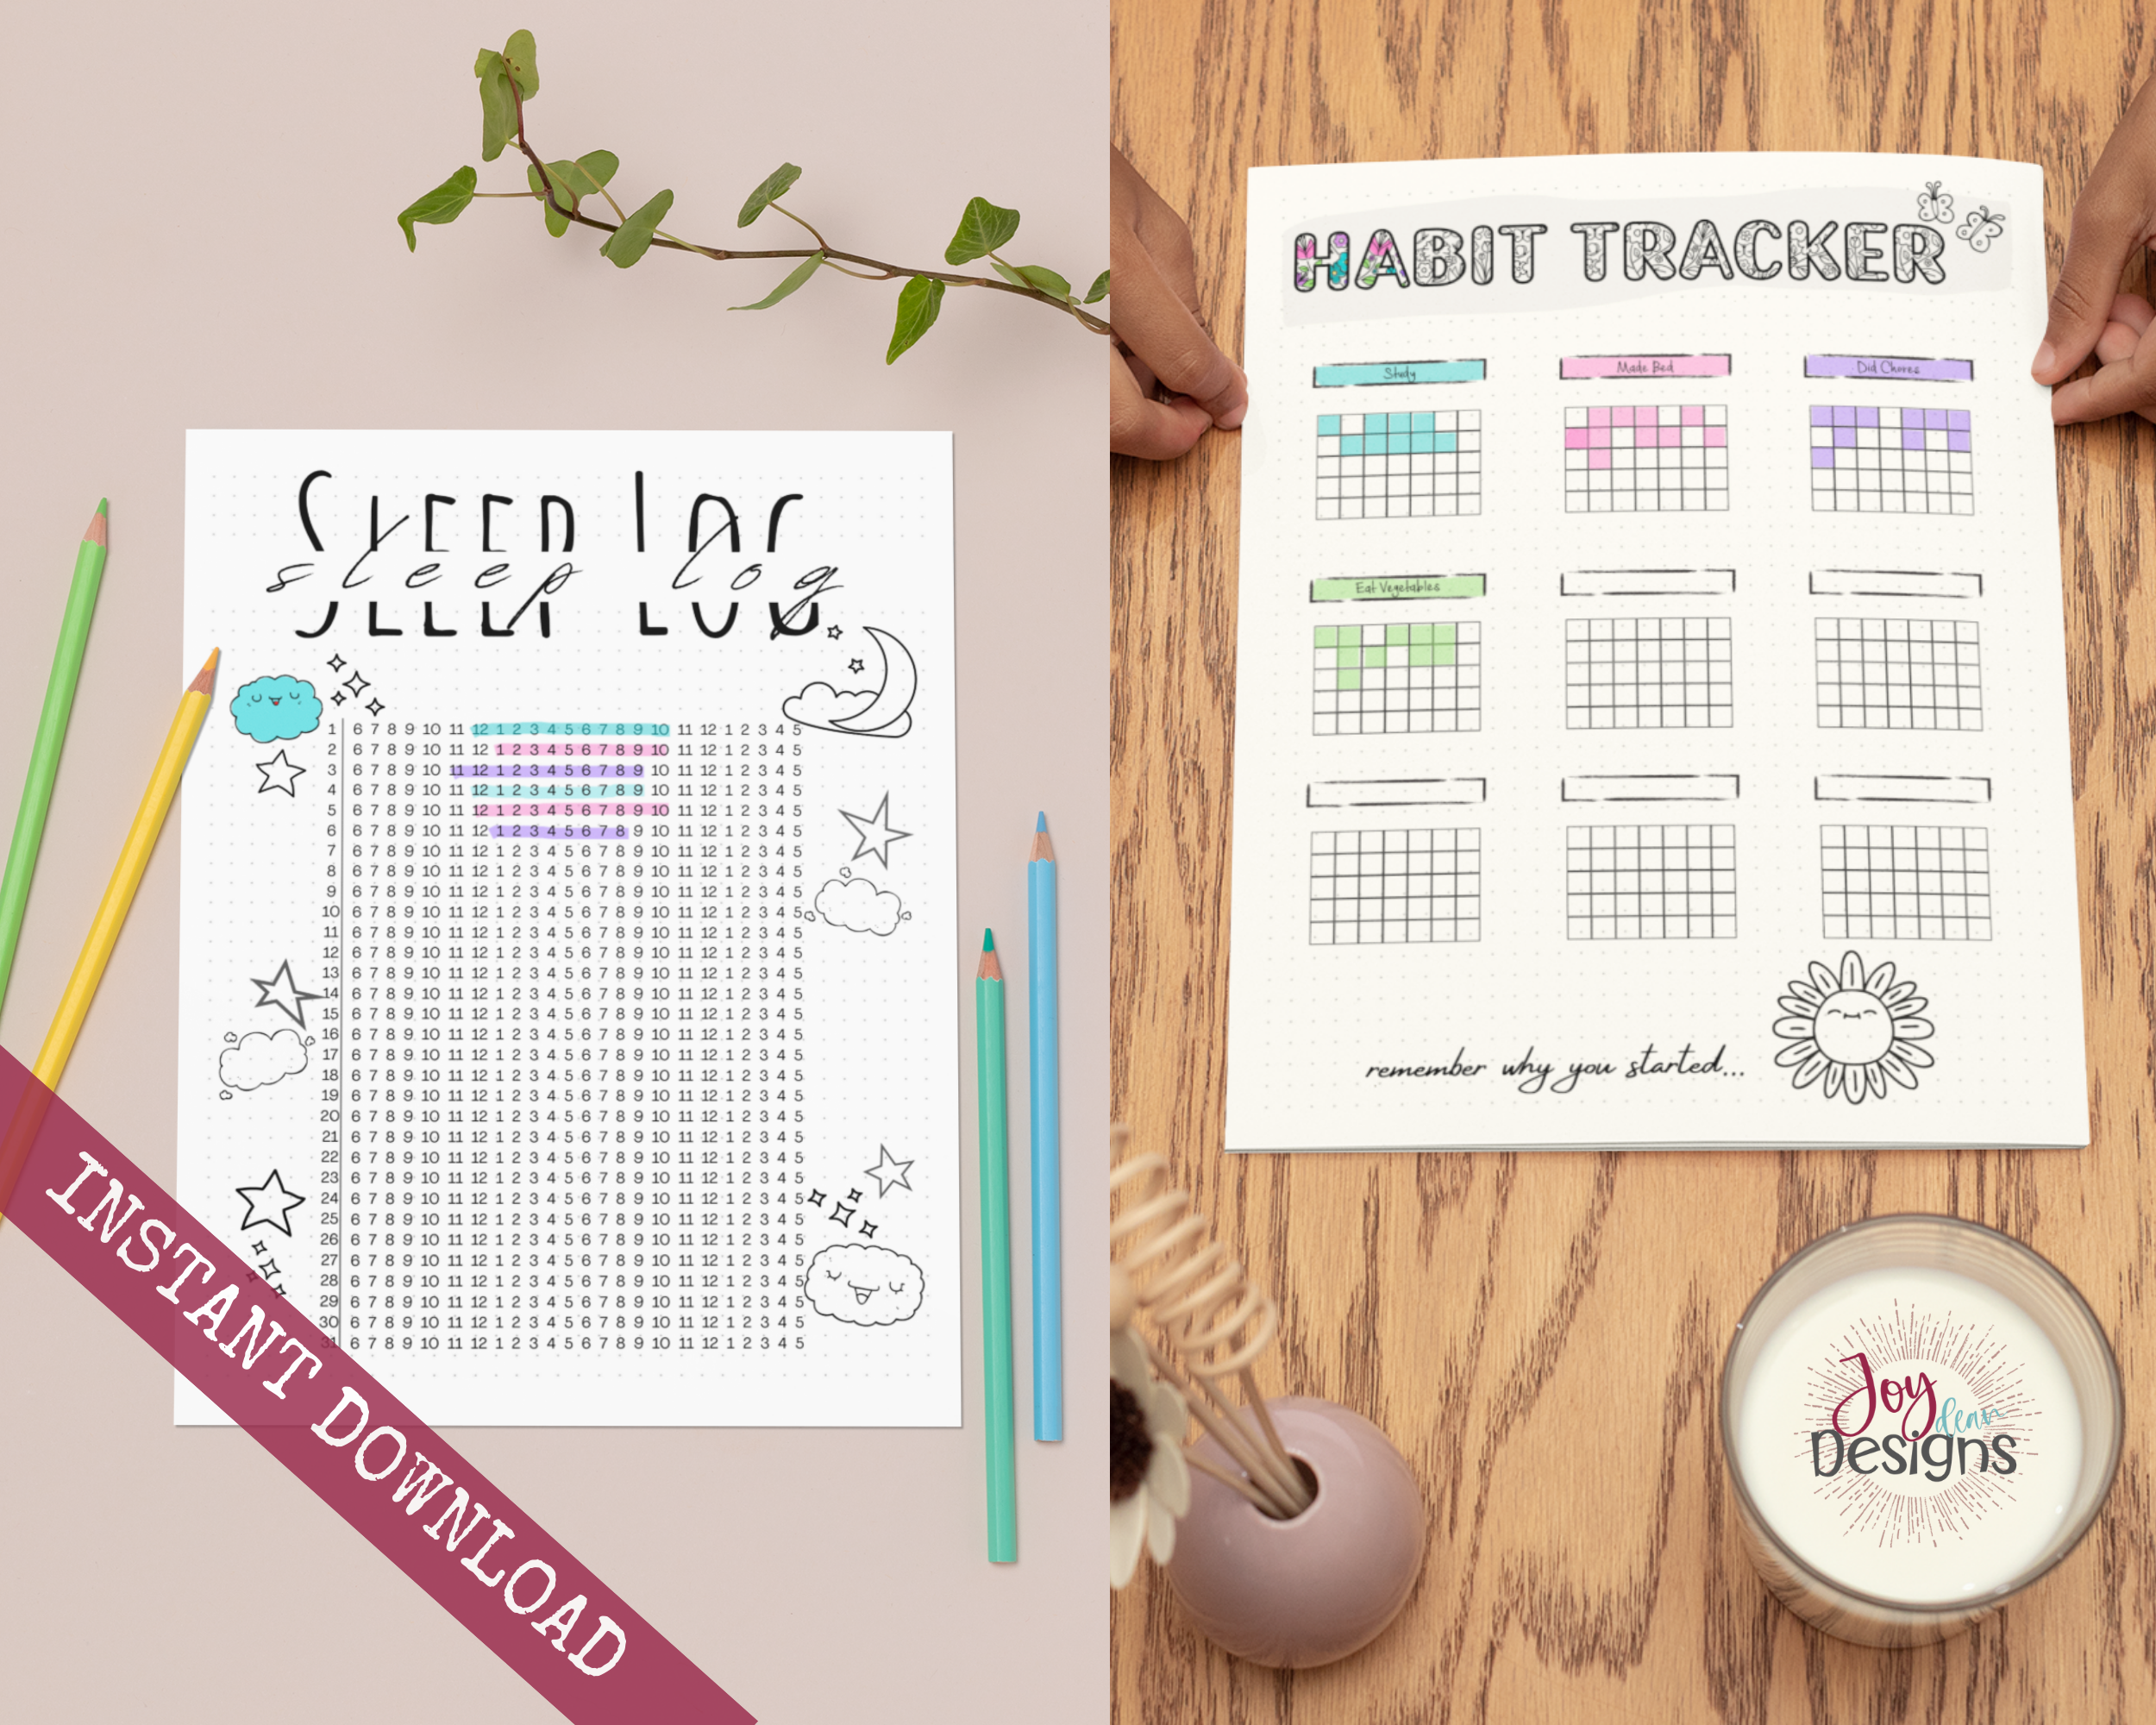 Monthly mood tracker bullet journal instant download planner printable habit digital daily weekly calendar 2024 water mental health anxiety relief color in pages coloring pages dotted bullett tracker bujo notebook goodnotes notability ipad march